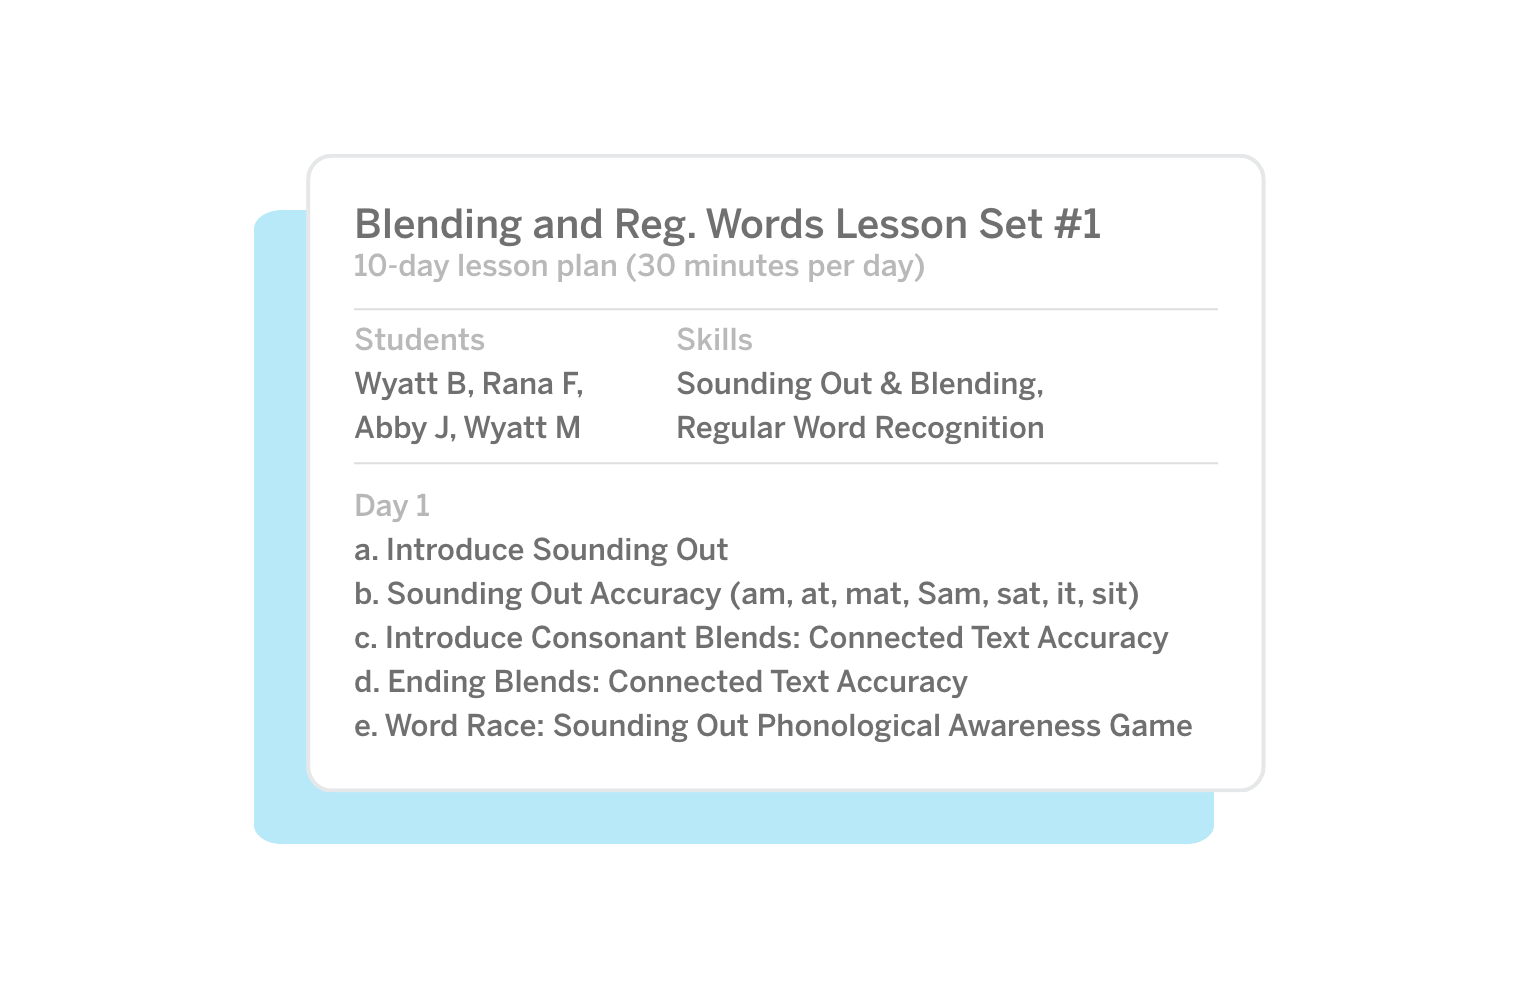 Lesson plan card outlining a 10-day reading fluency assessment program with bullet points on teaching techniques focusing on sound blending and word recognition.